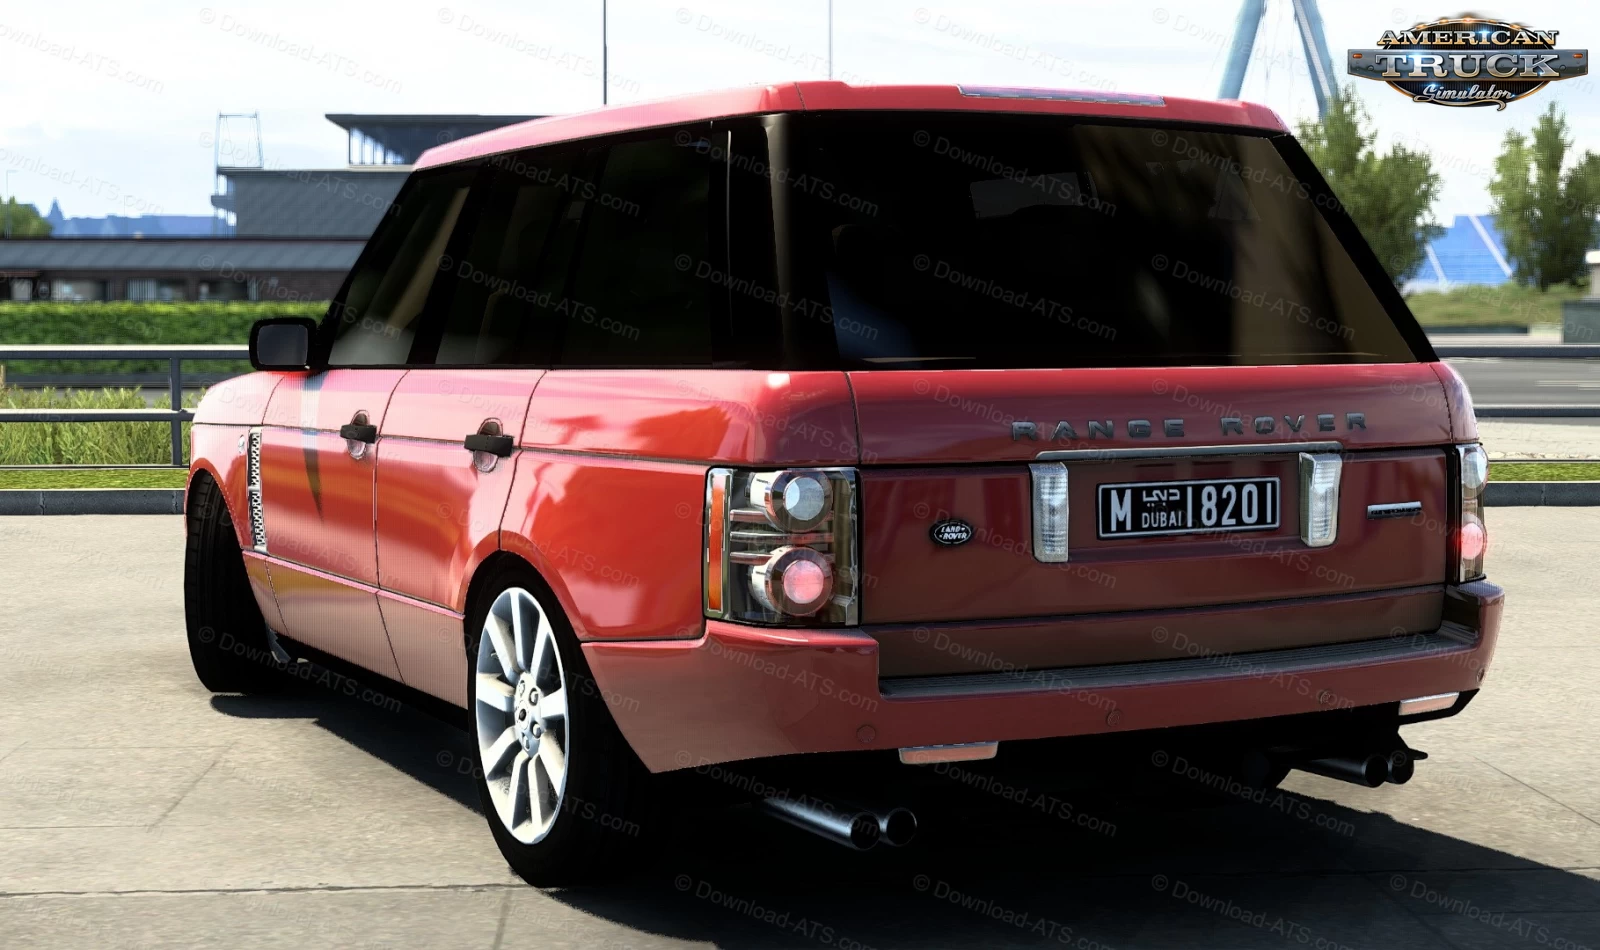 Range Rover Supercharged 2008 v7.6 (1.48.x) for ATS